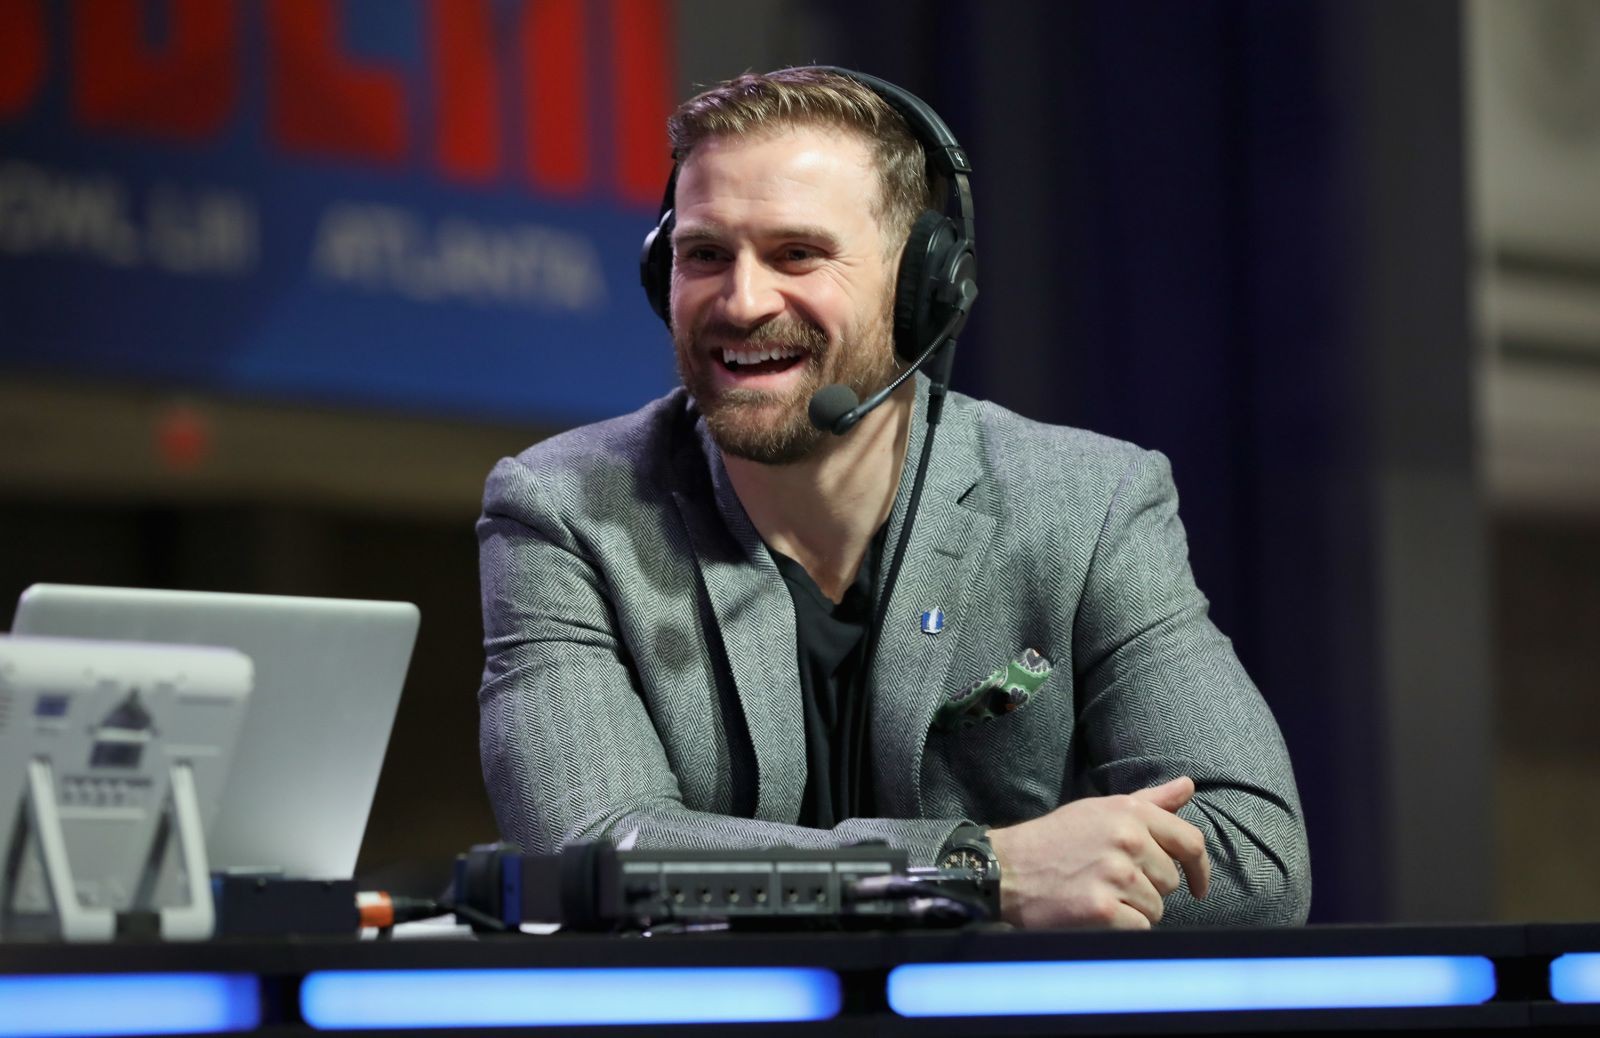 Chris Long challenges Sixers JJ Redick to a college basketball bet